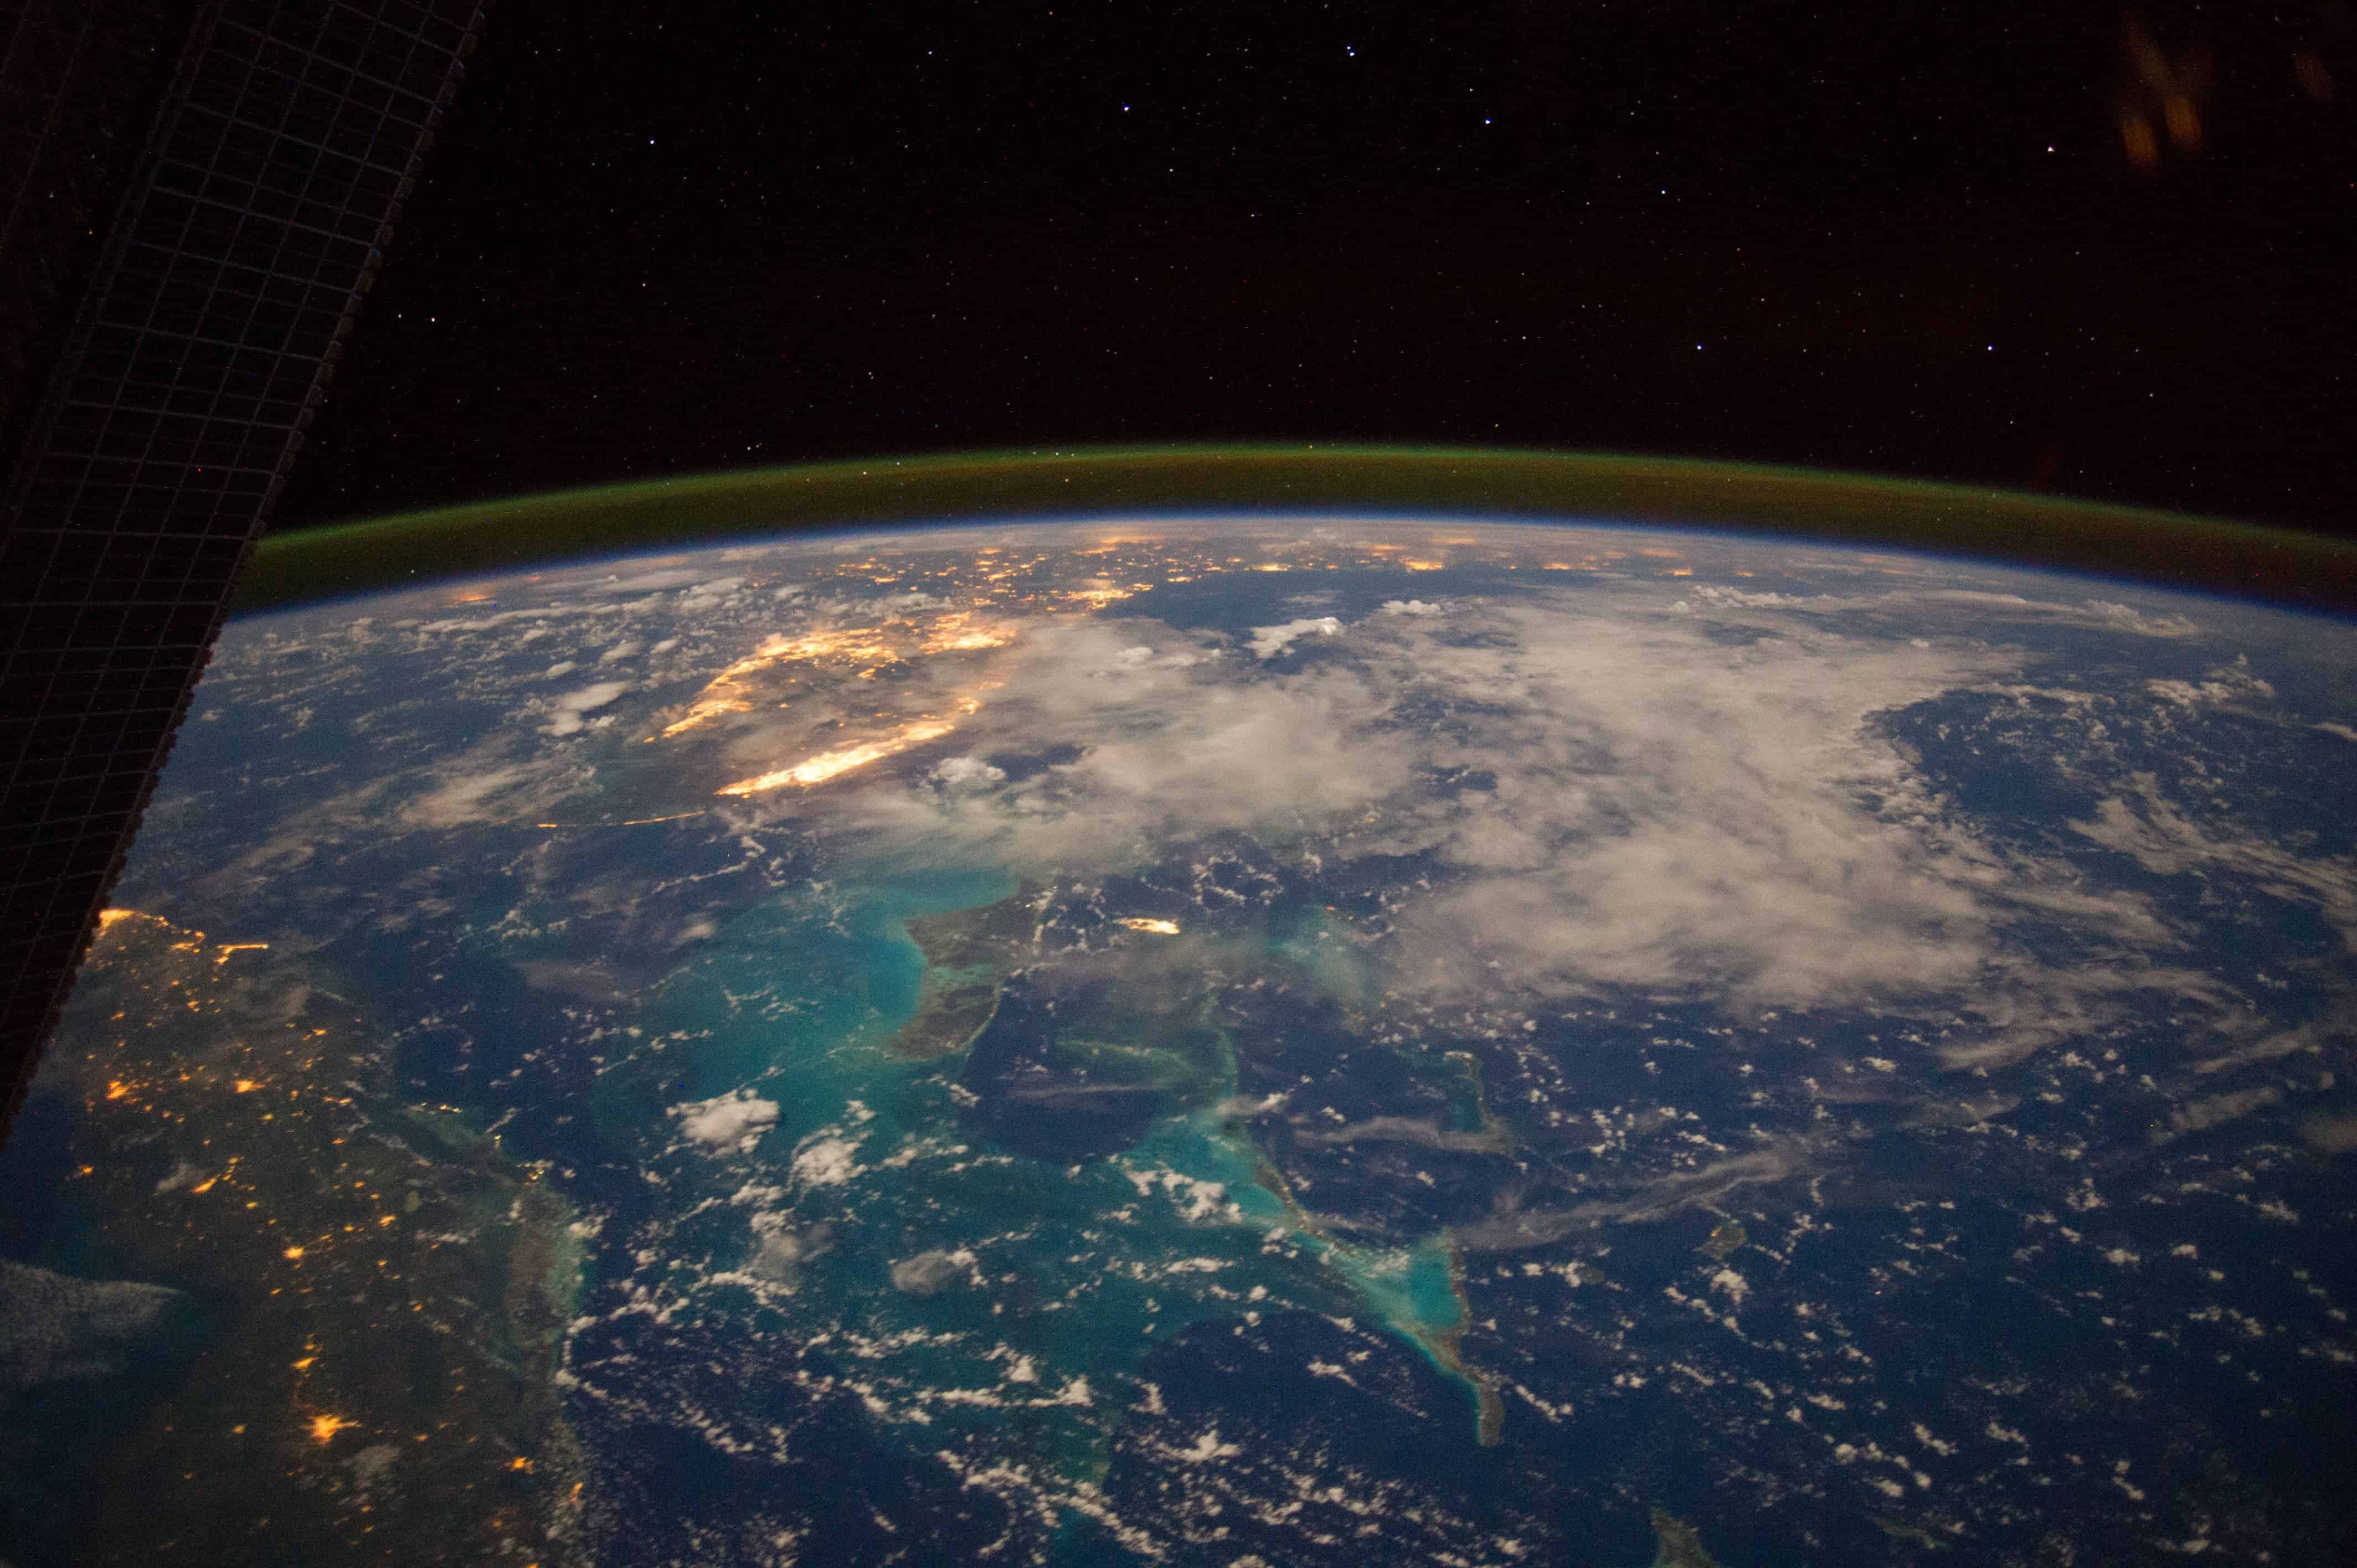 The belief that the Earth is flat pretty much went extinct when we sent astronauts to space, and they returned with photos. But now, after all this time, it's making an unlikely return. Credits: NASA.